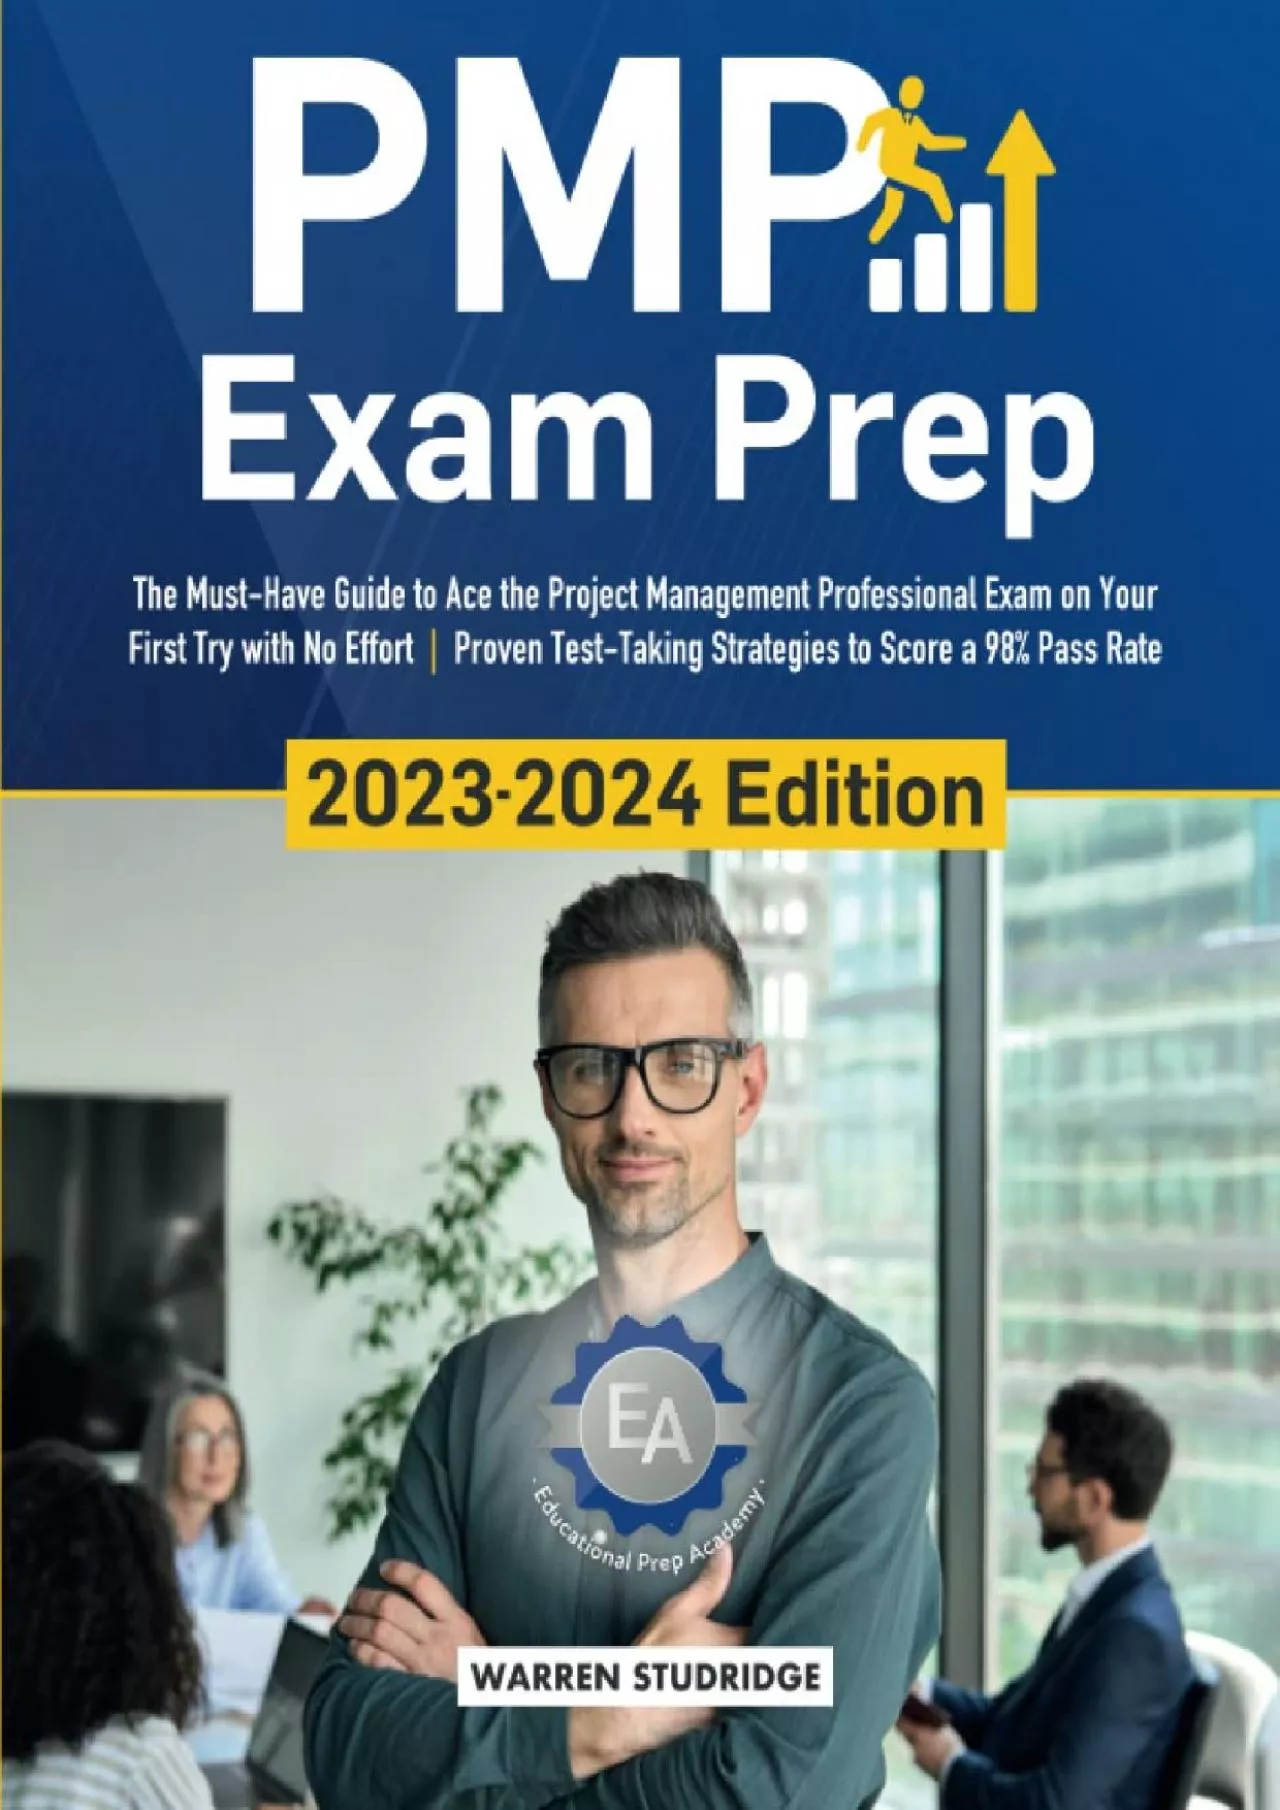 [READ] PMP Exam Prep 2023-2024 Edition: The Must-Have Guide to Ace the Exam on Your First